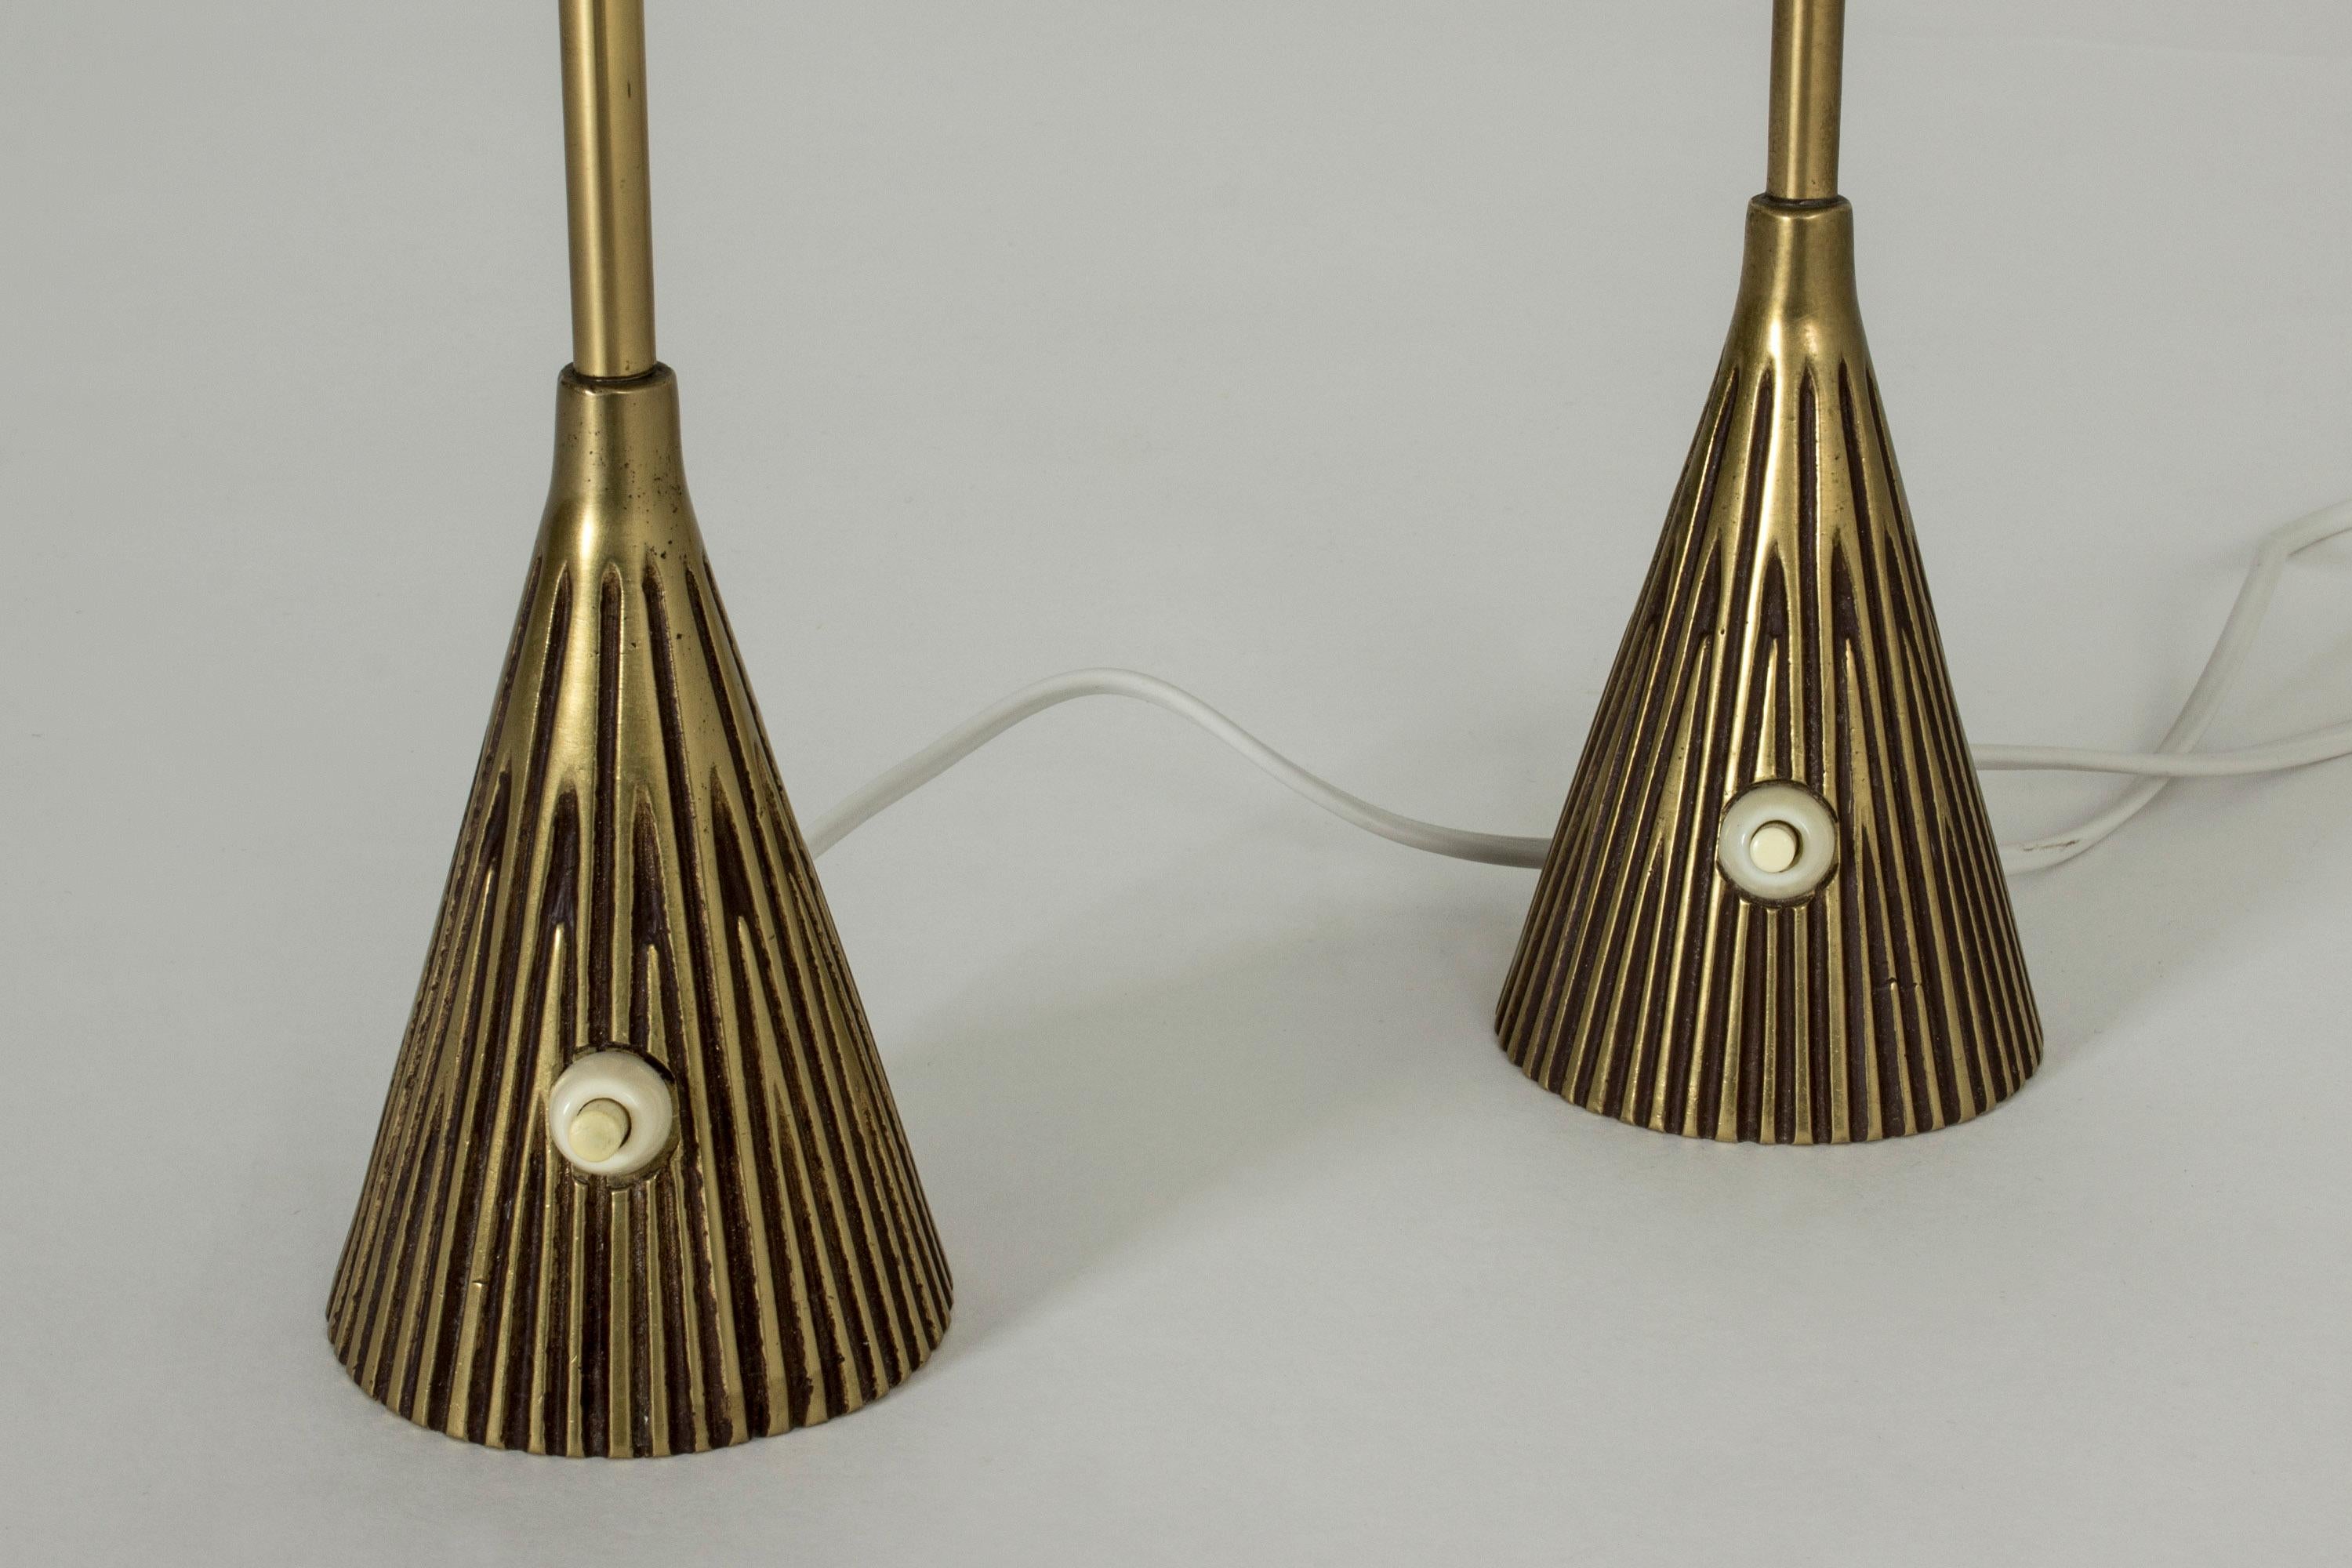 Scandinavian Modern Pair of Brass Table Lamps by Sonja Katrin for ASEA